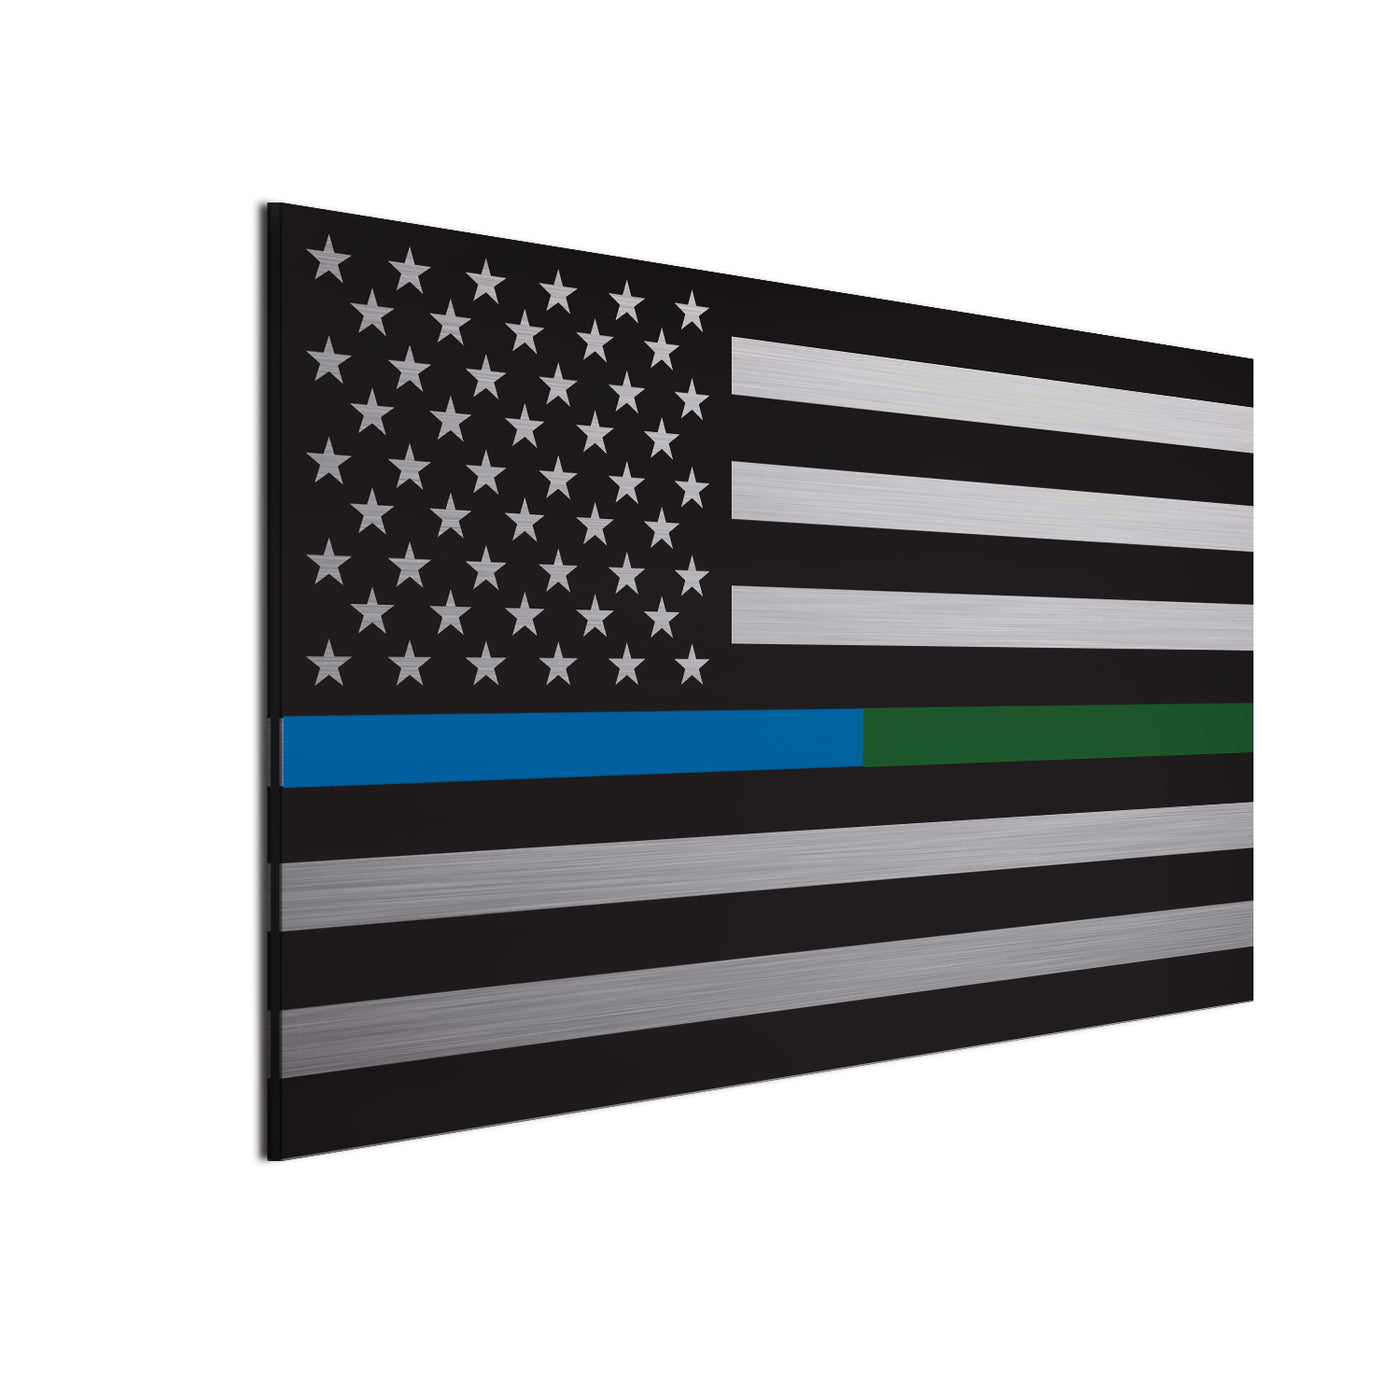 Black with blue and green stripe.